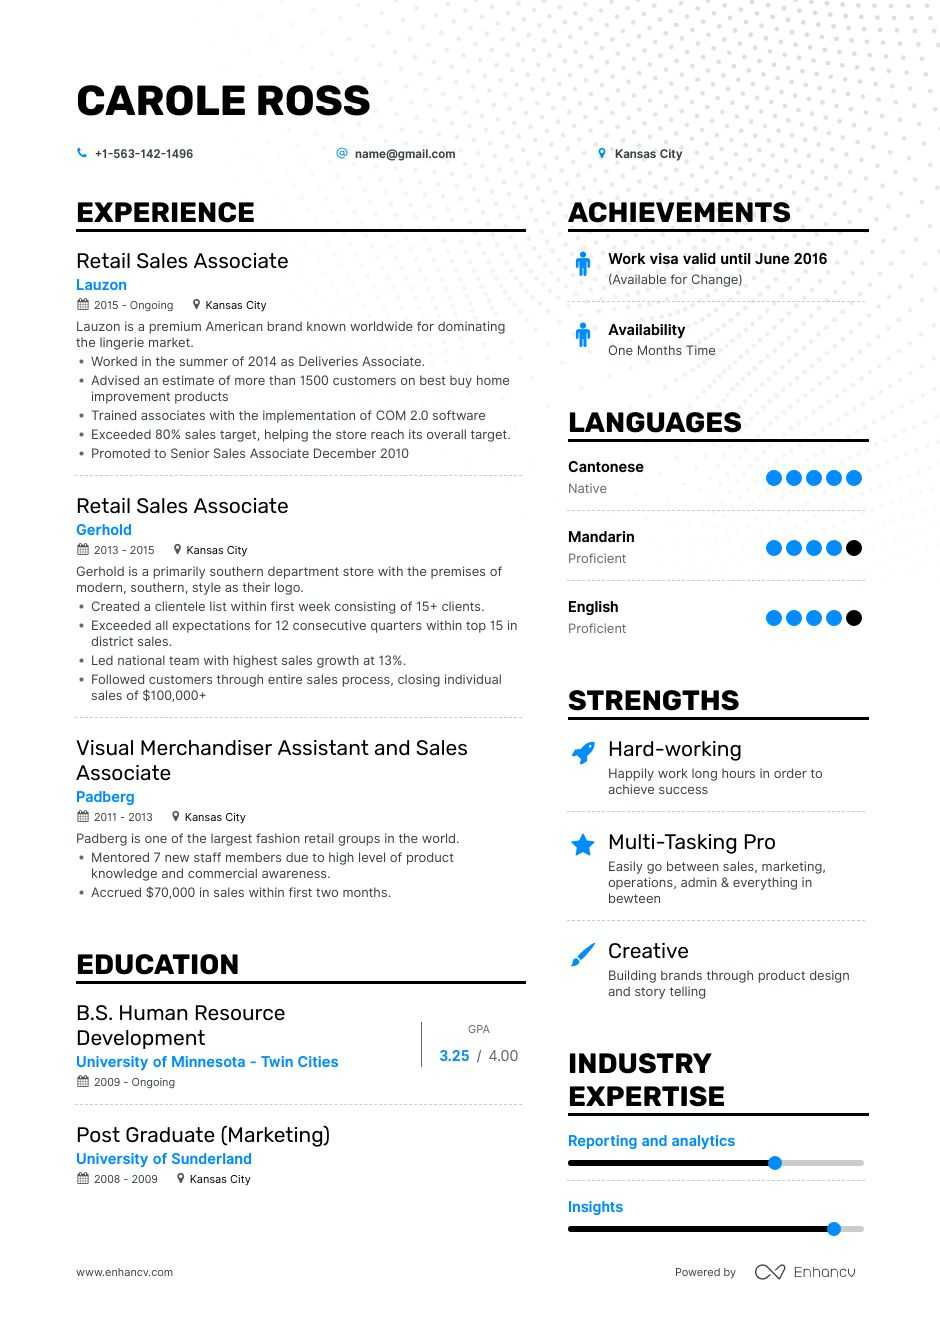 The Best Retail Sales Associate Resume Examples & Skills to Get You Hired